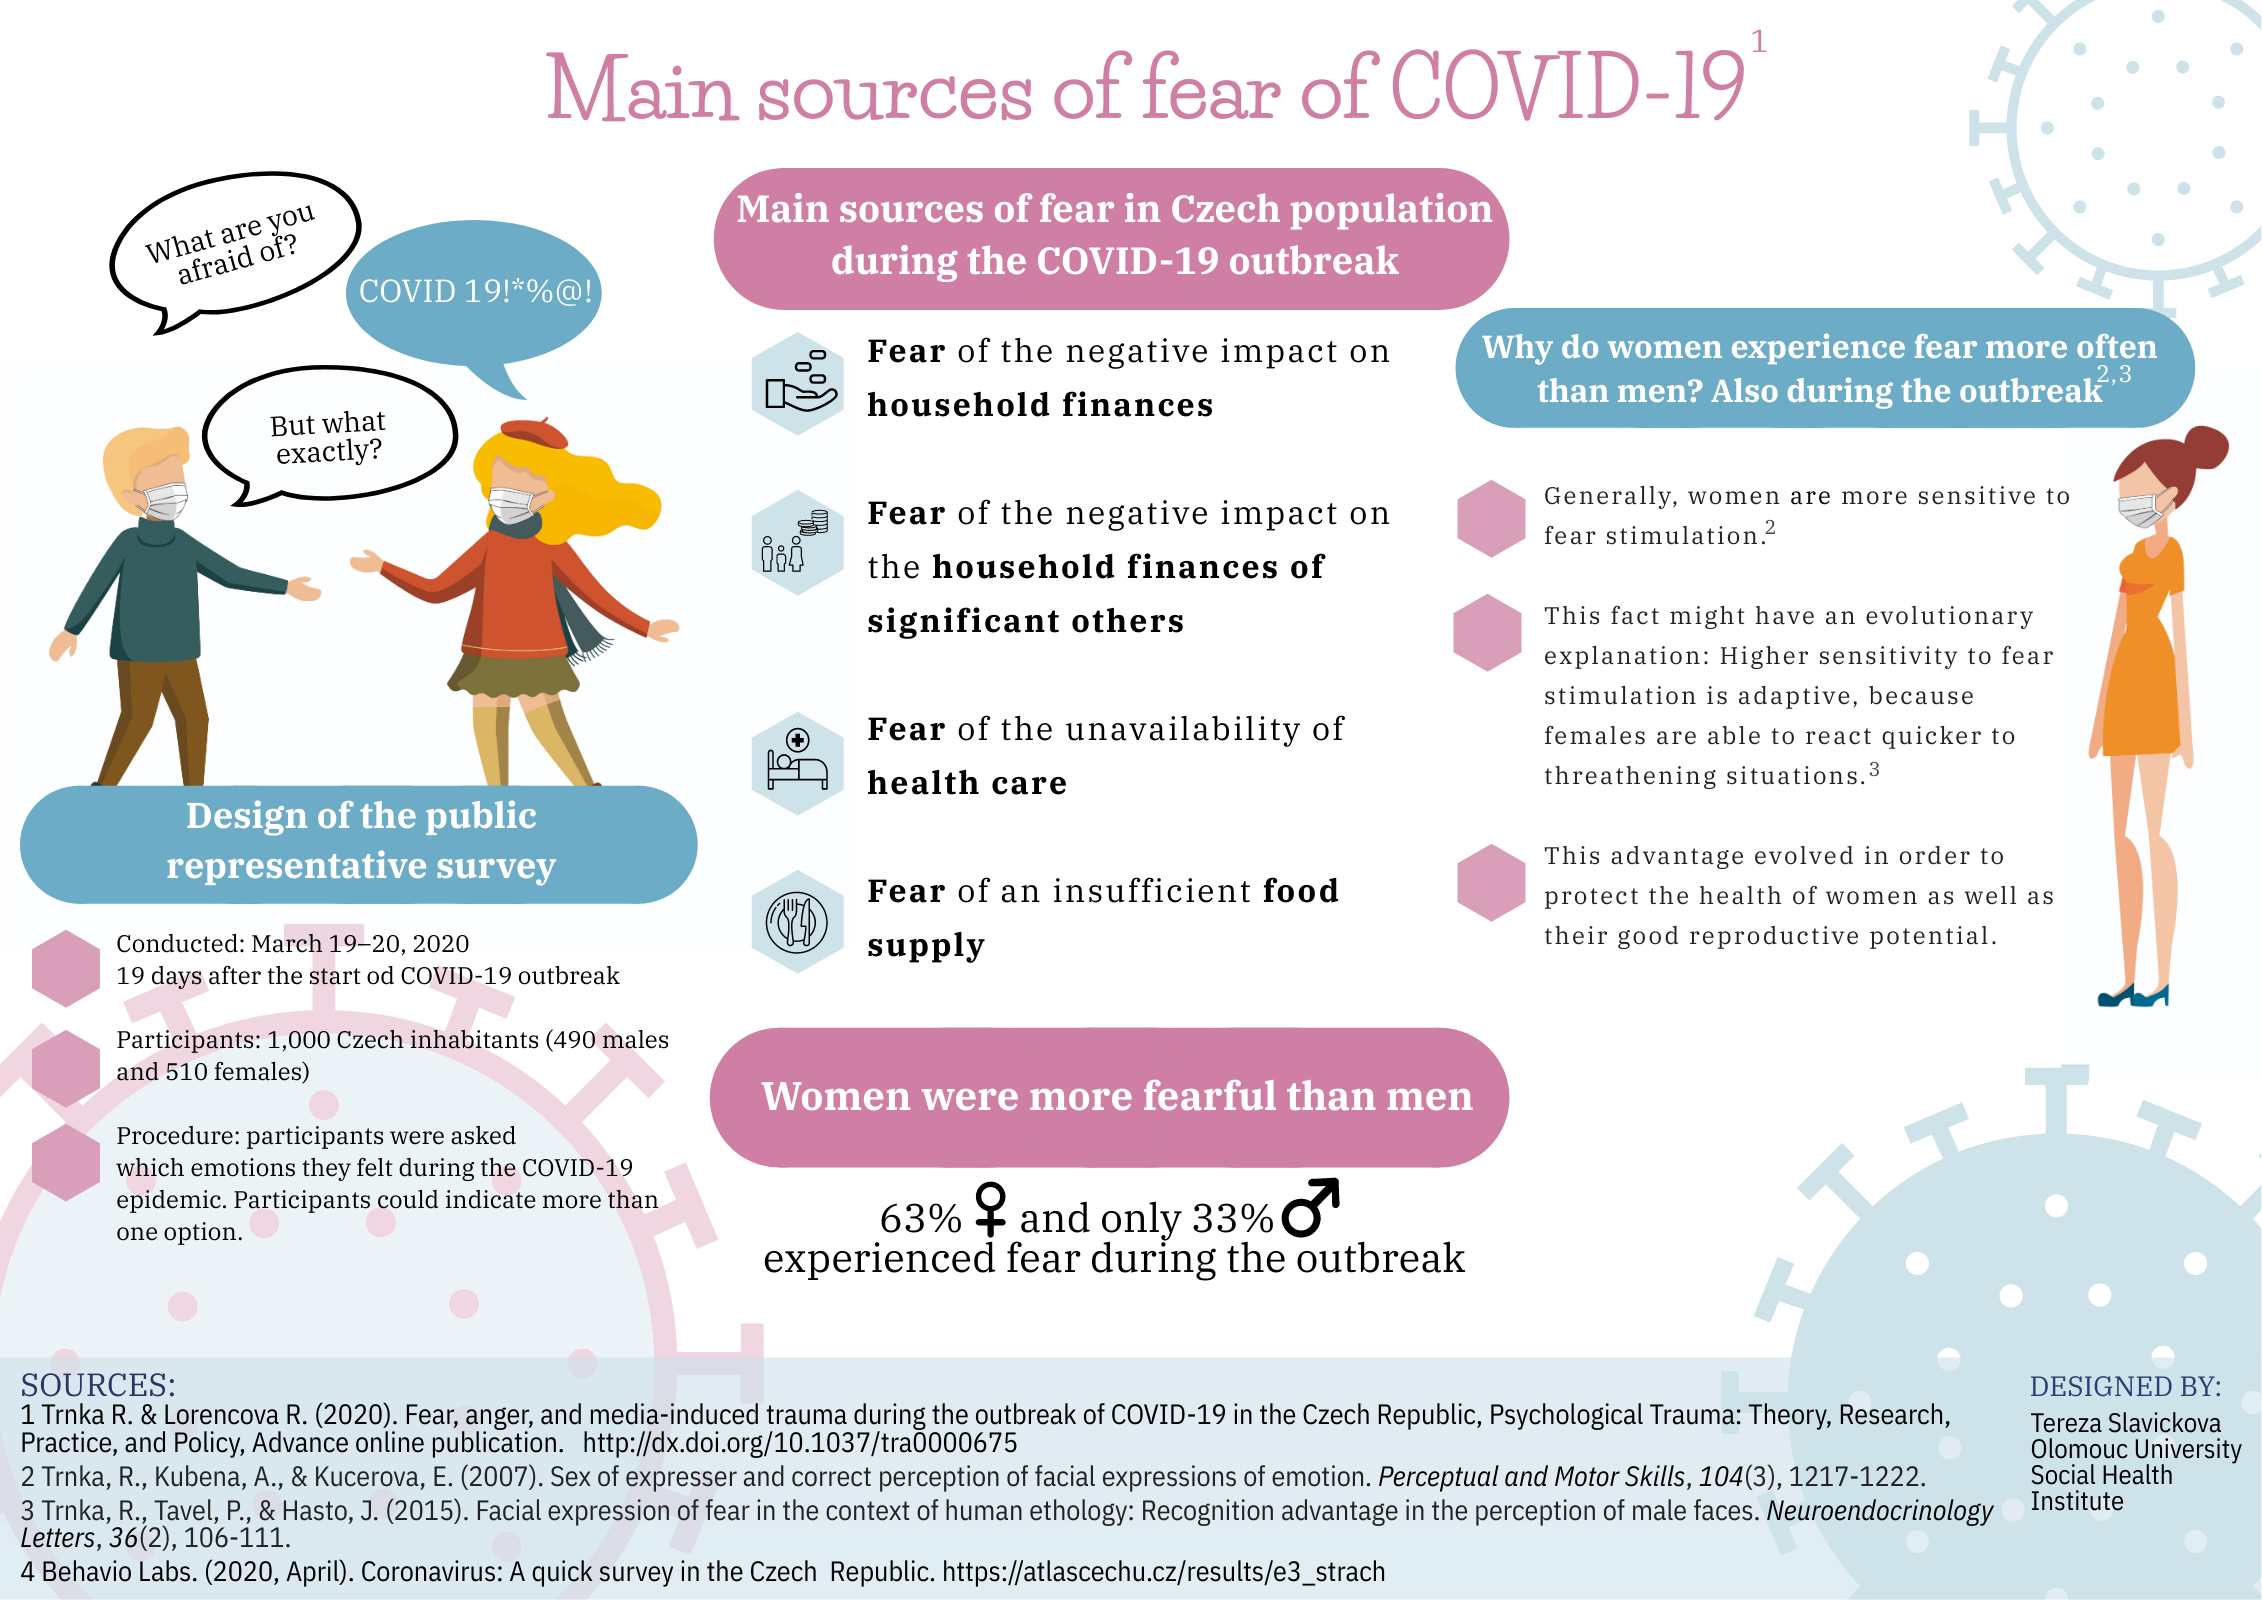 What kinds of traumatic emotional responses occurred during the COVID-19 outbreak?